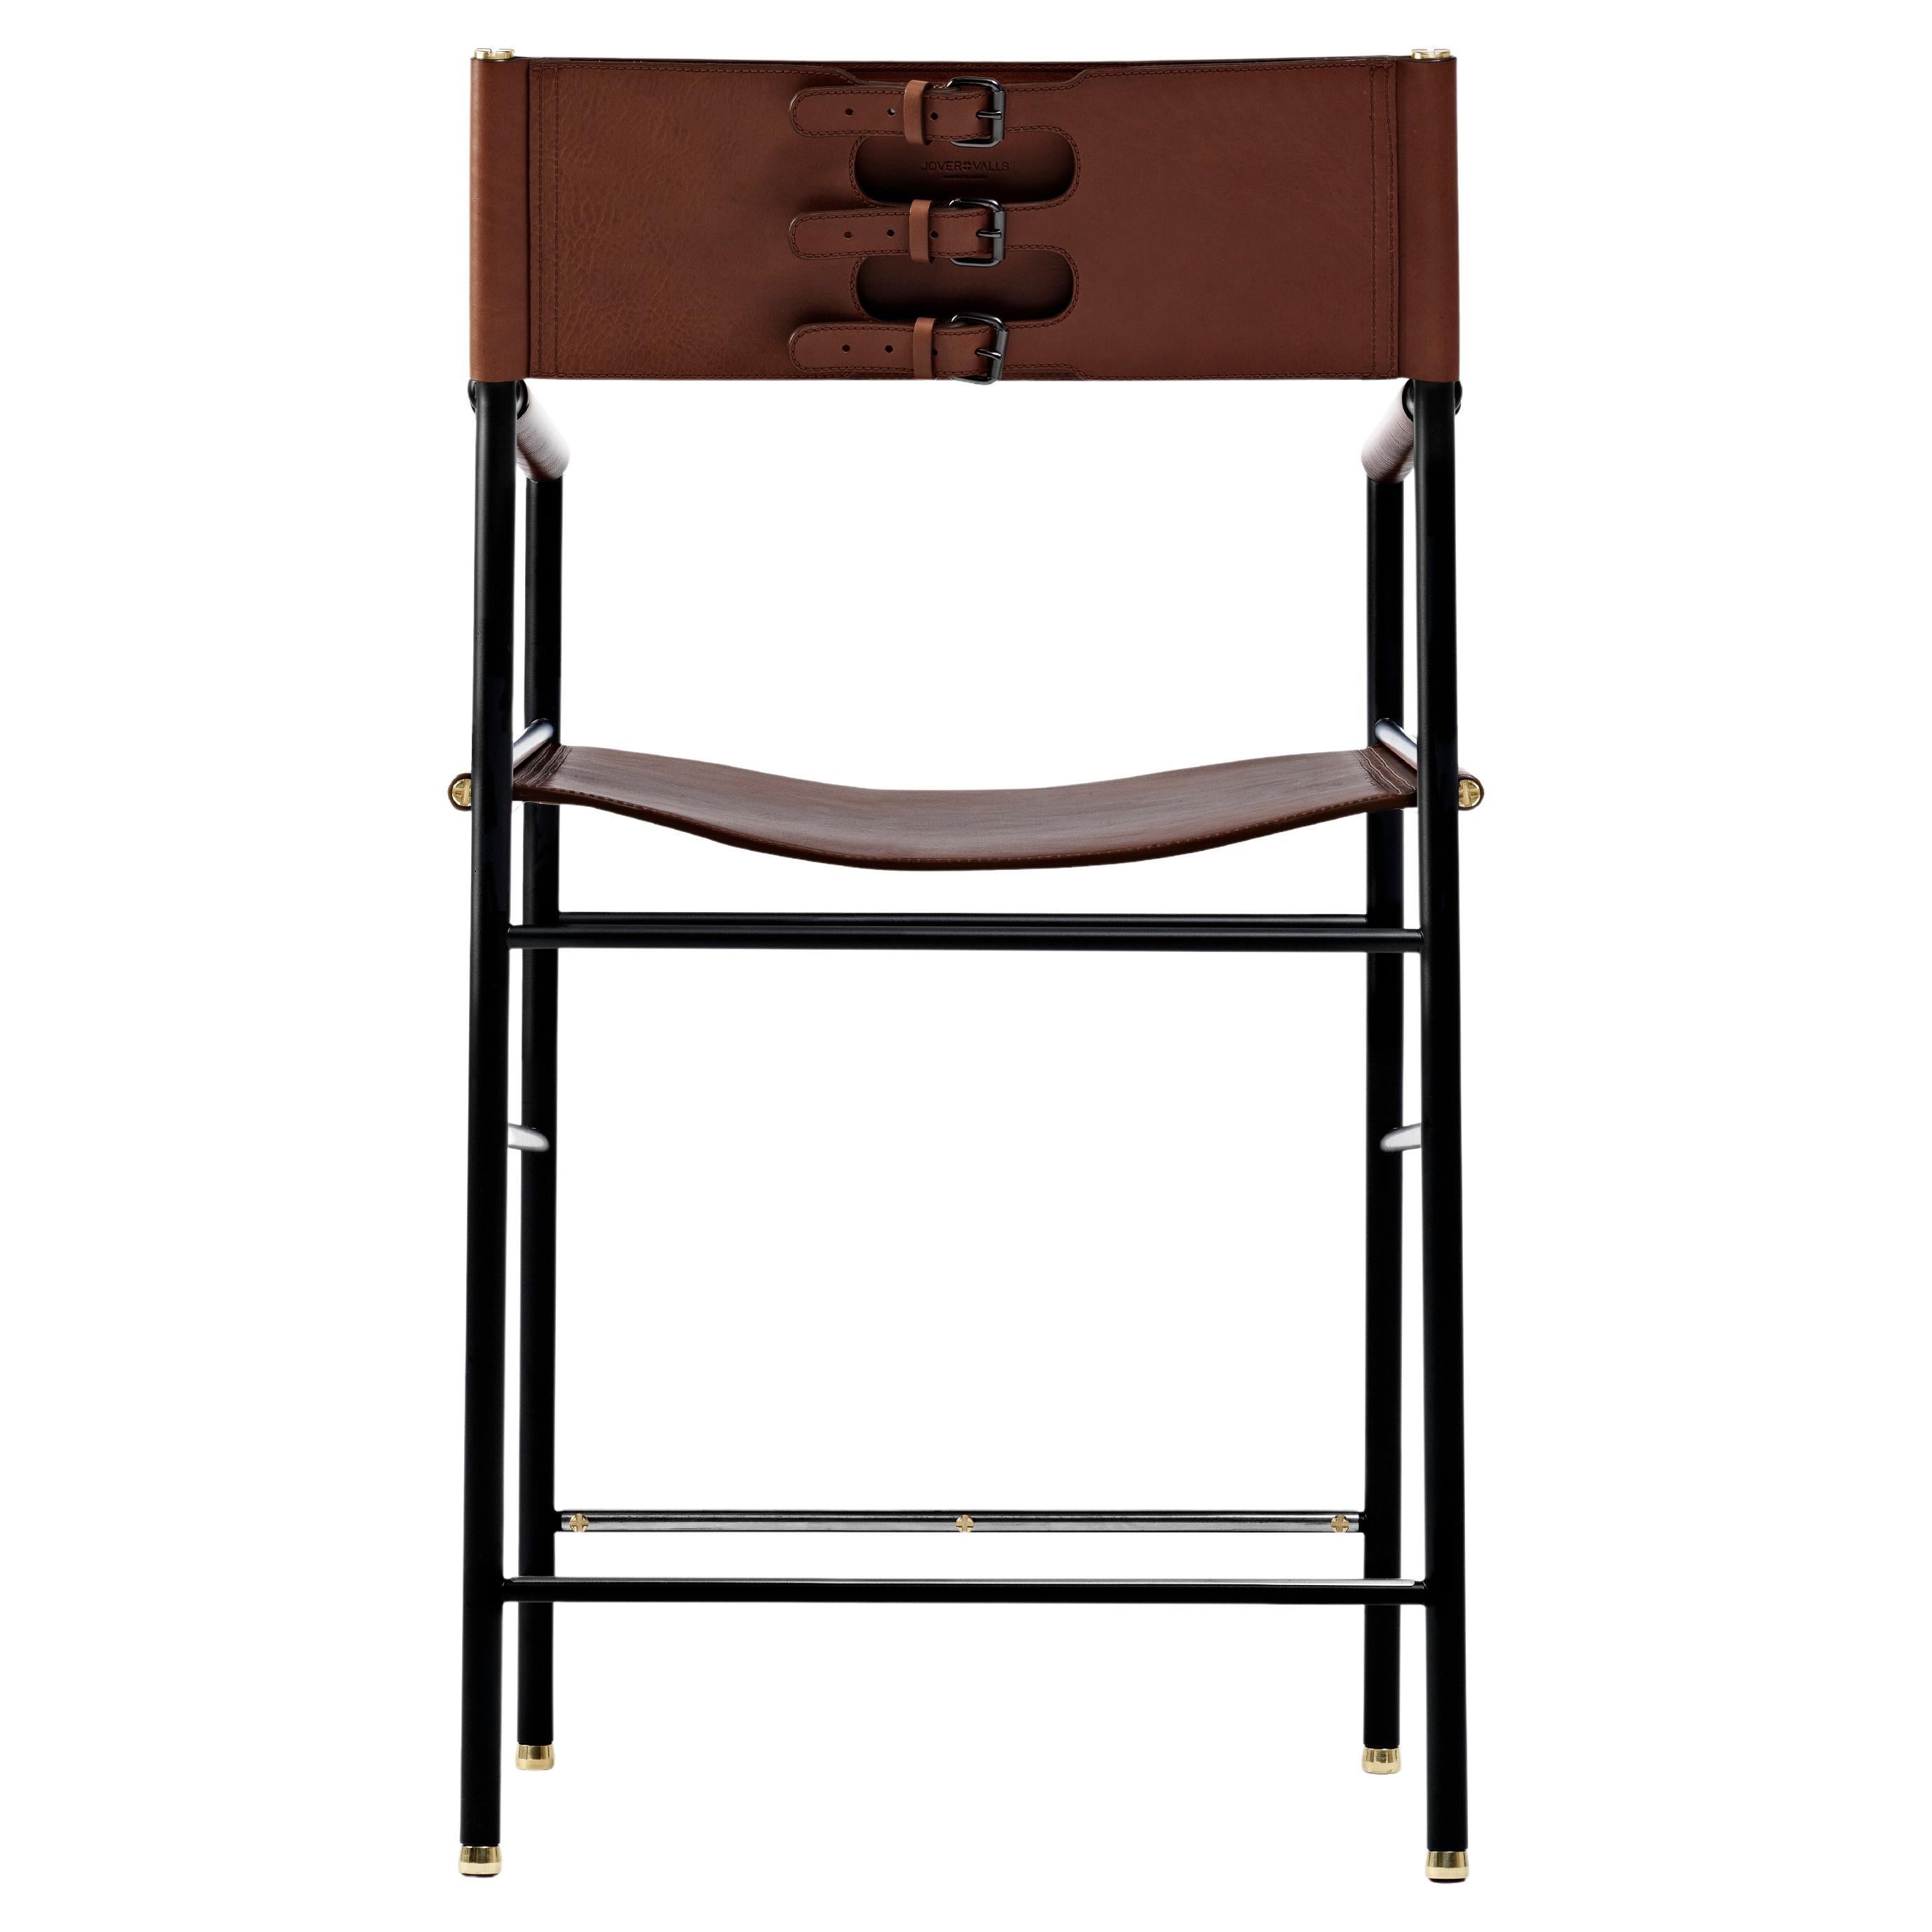 Classic Contemporary Barstool w Backrest Dark Brown Leather & Black Rubber Metal